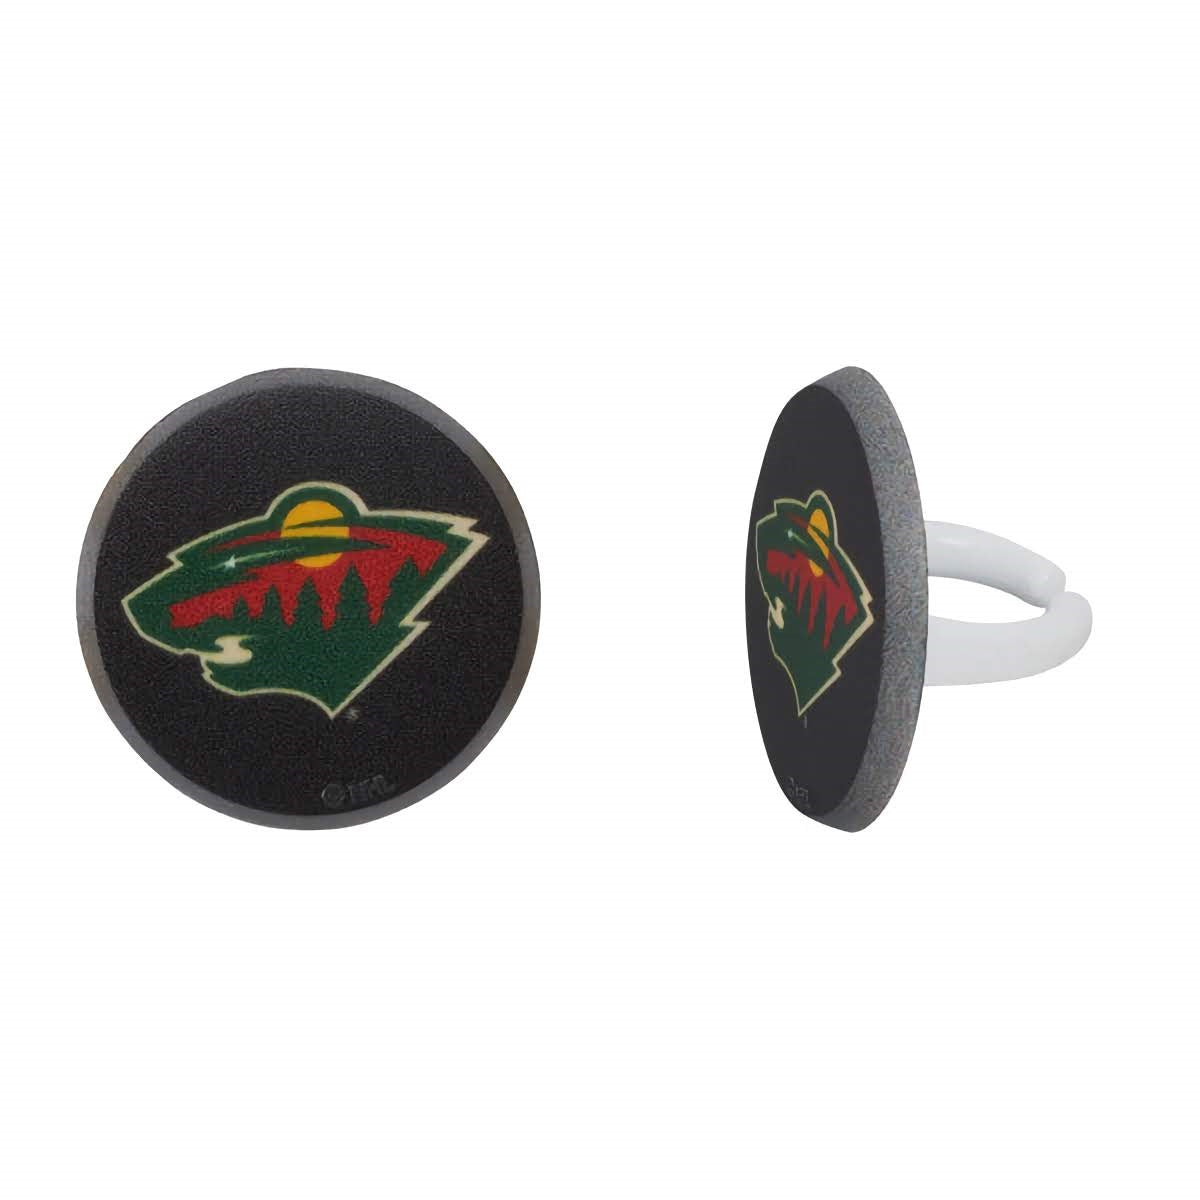 Minnesota Wild cupcake rings, six-pack, featuring the team logo, perfect for NHL fans and hockey-themed party desserts.